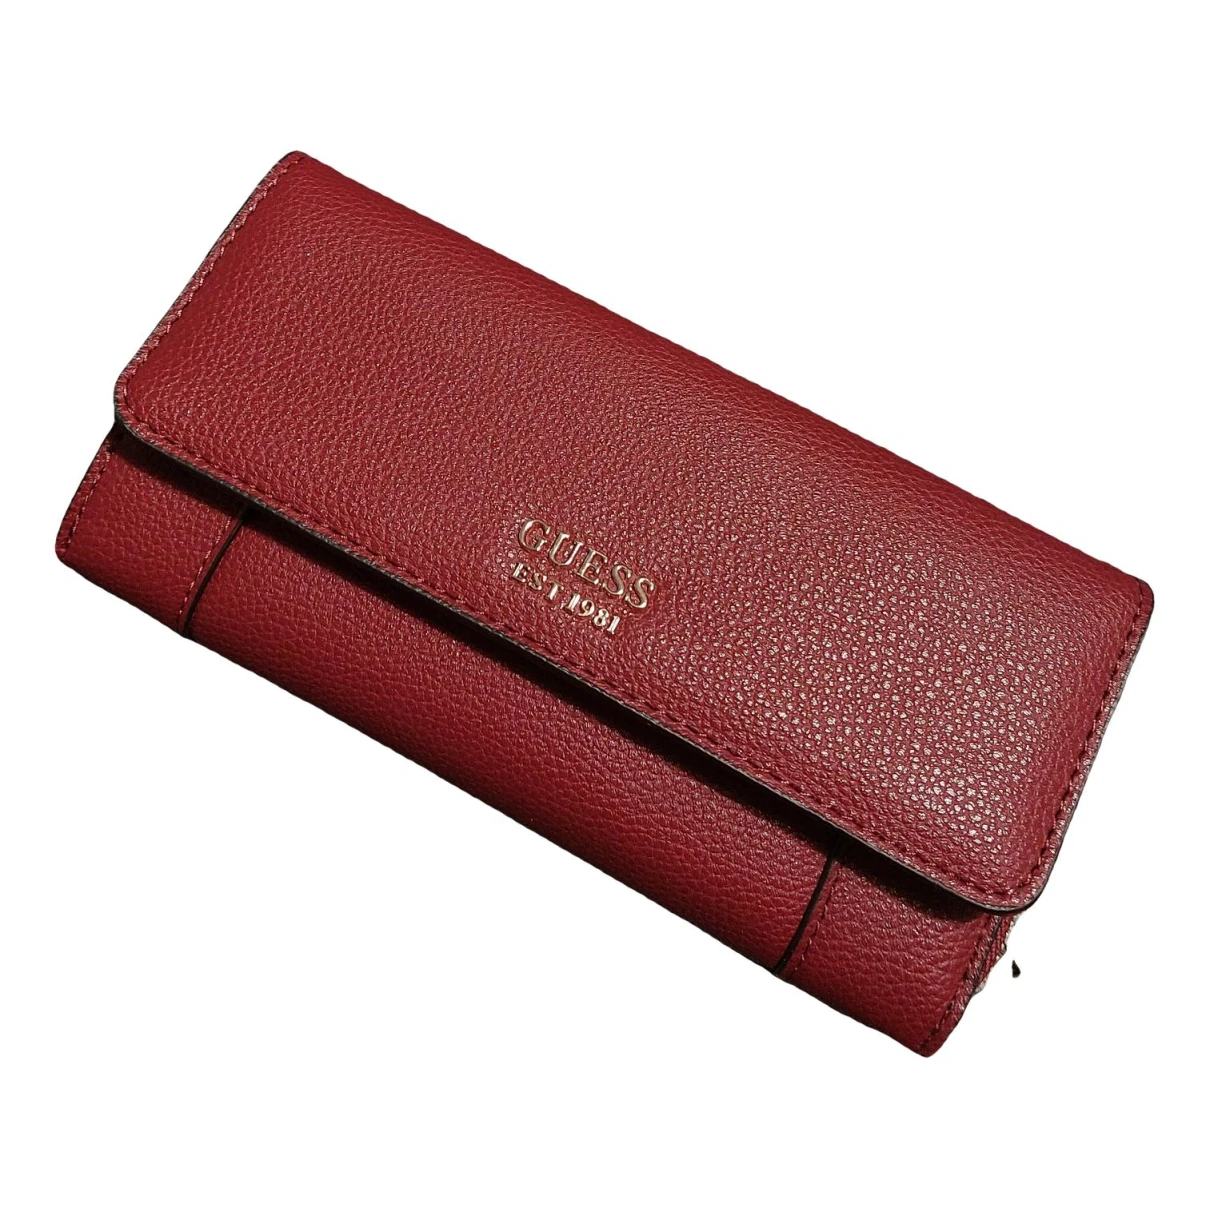 Pre-owned Guess Wallet In Burgundy